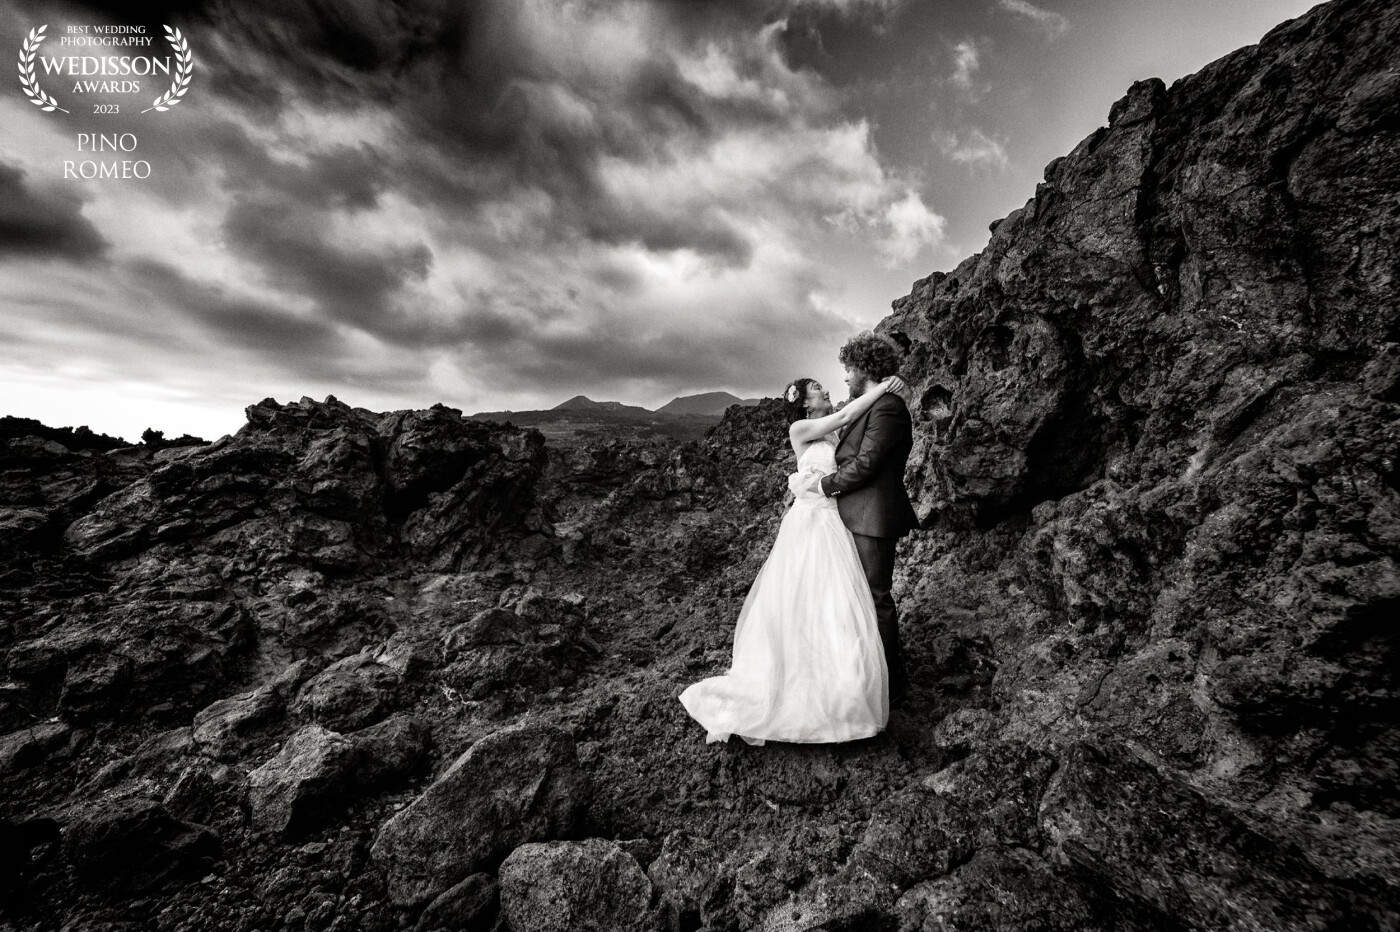 A post wedding portrait session of Joan and Bastien on the island of La Palma, Canary Islands.  The cooled lava field in the south of the island is a very inspiring lunar setting for a black and white rendering.  This is the 6th photo from the same portrait session in La Palma Island to receive an award... it's just crazy!